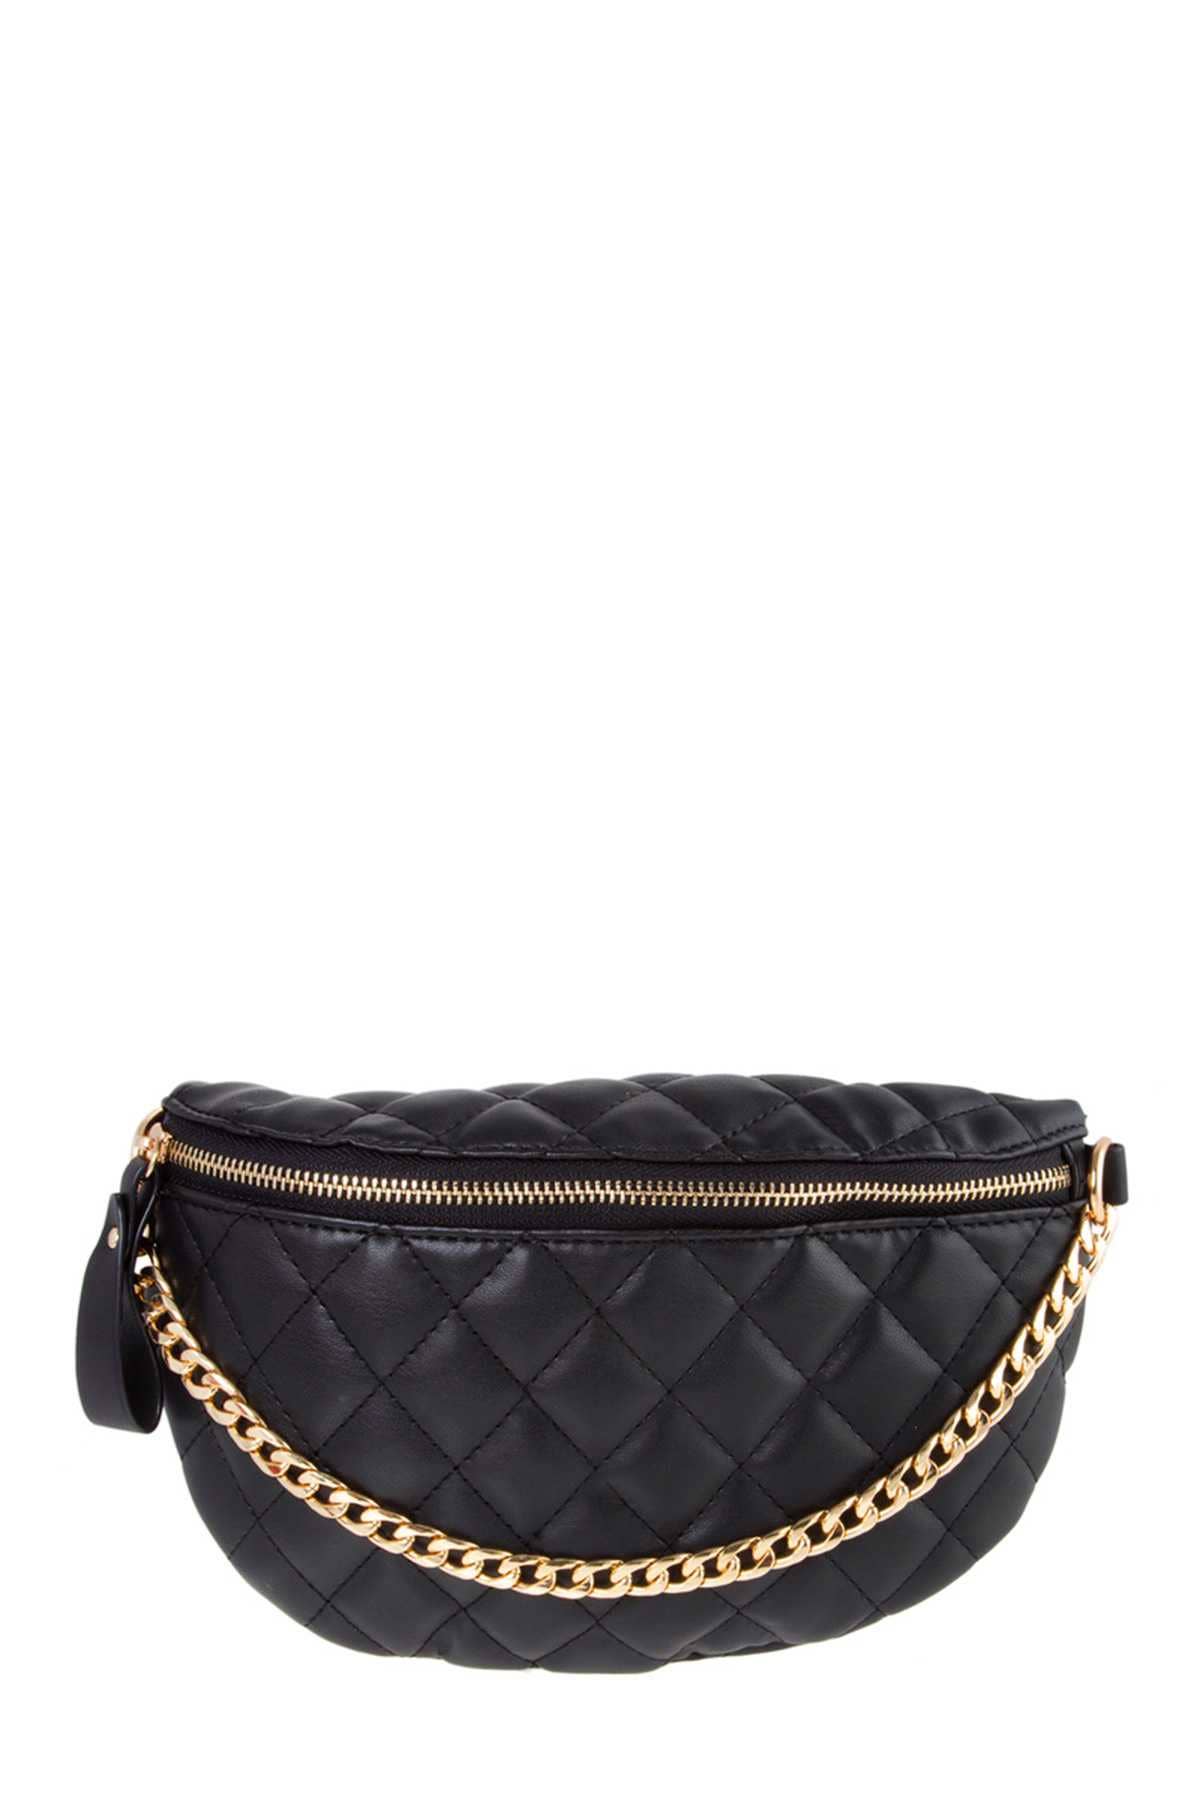 Chain & Quilt Fanny Pack - Black/Gold